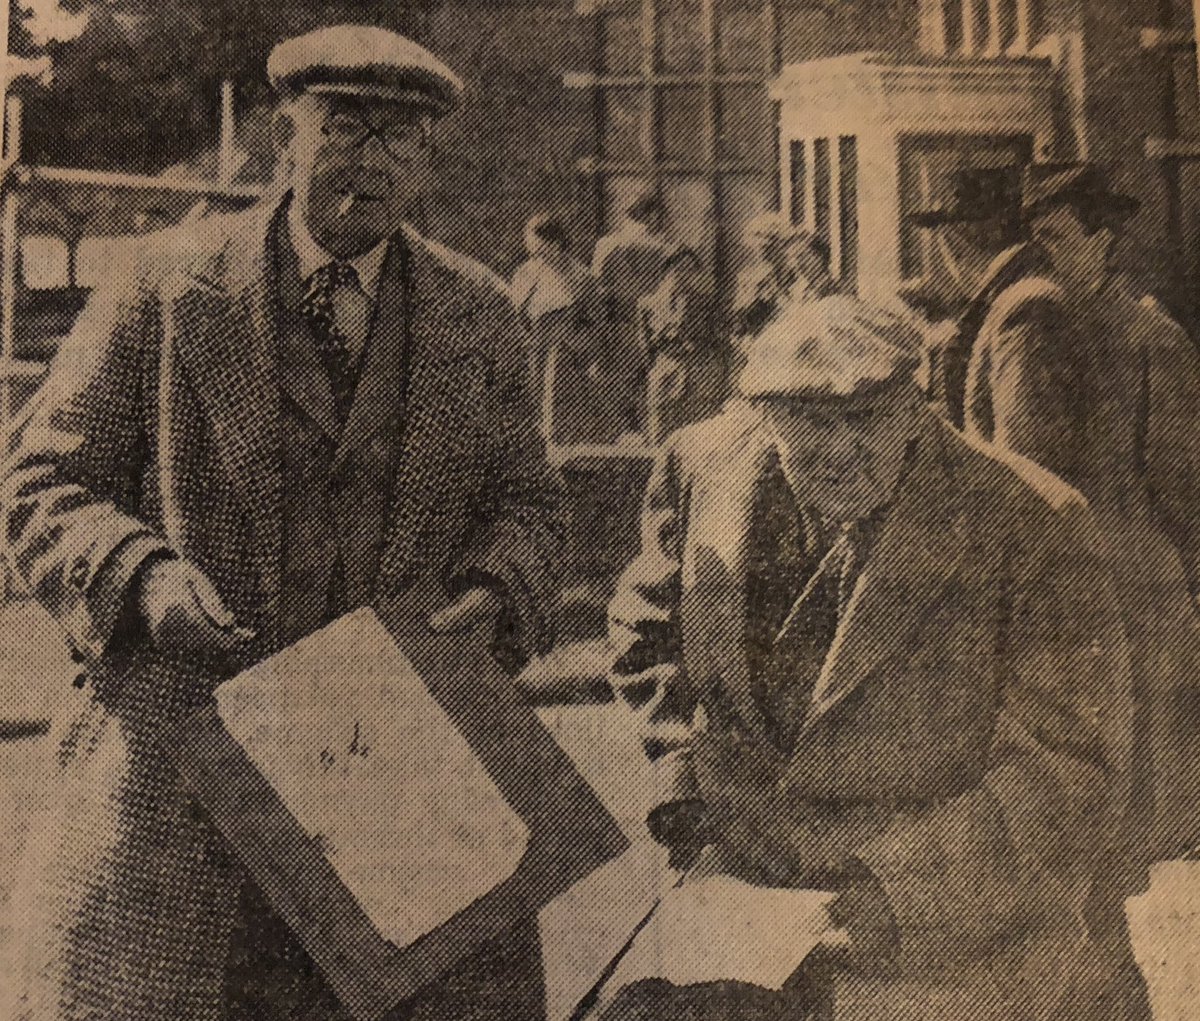 Two old friends at Hunstanton GC attending the 1951 English Men's Amateur Championship - James Sherlock, professional and Bernard Darwin, 'our golf correspondent' for The Times. #golfhistory #eg100 #golf